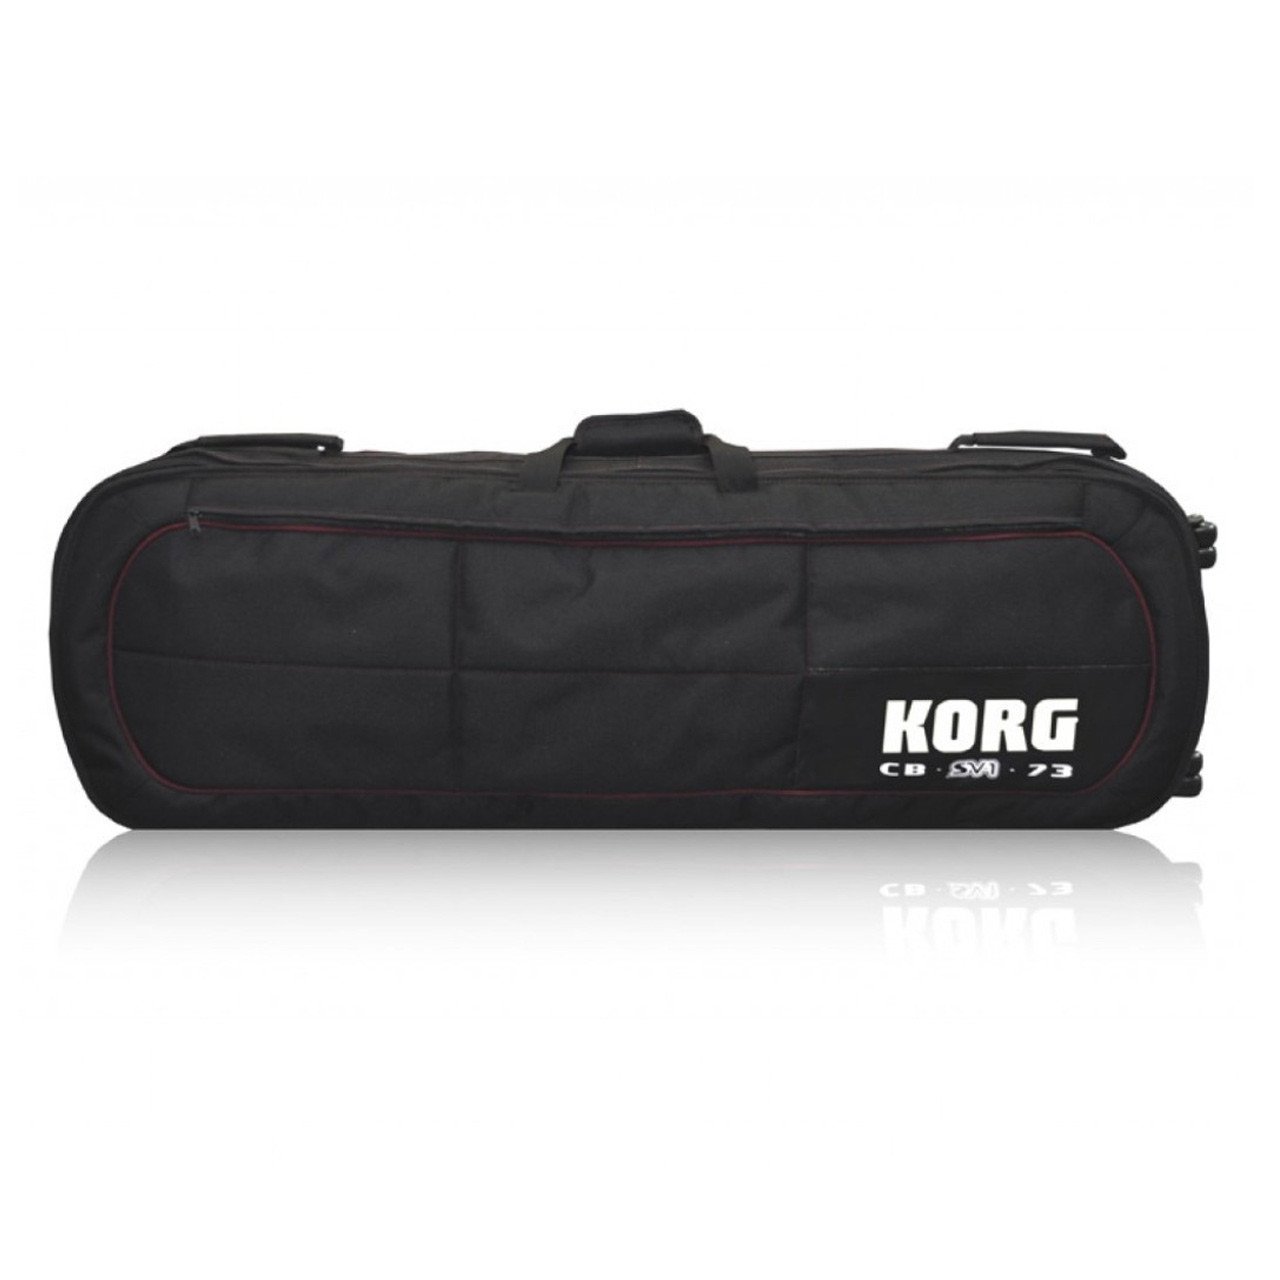 Keyboard Accessories - Korg SV-1 73 Digital Piano Carry Bag Case